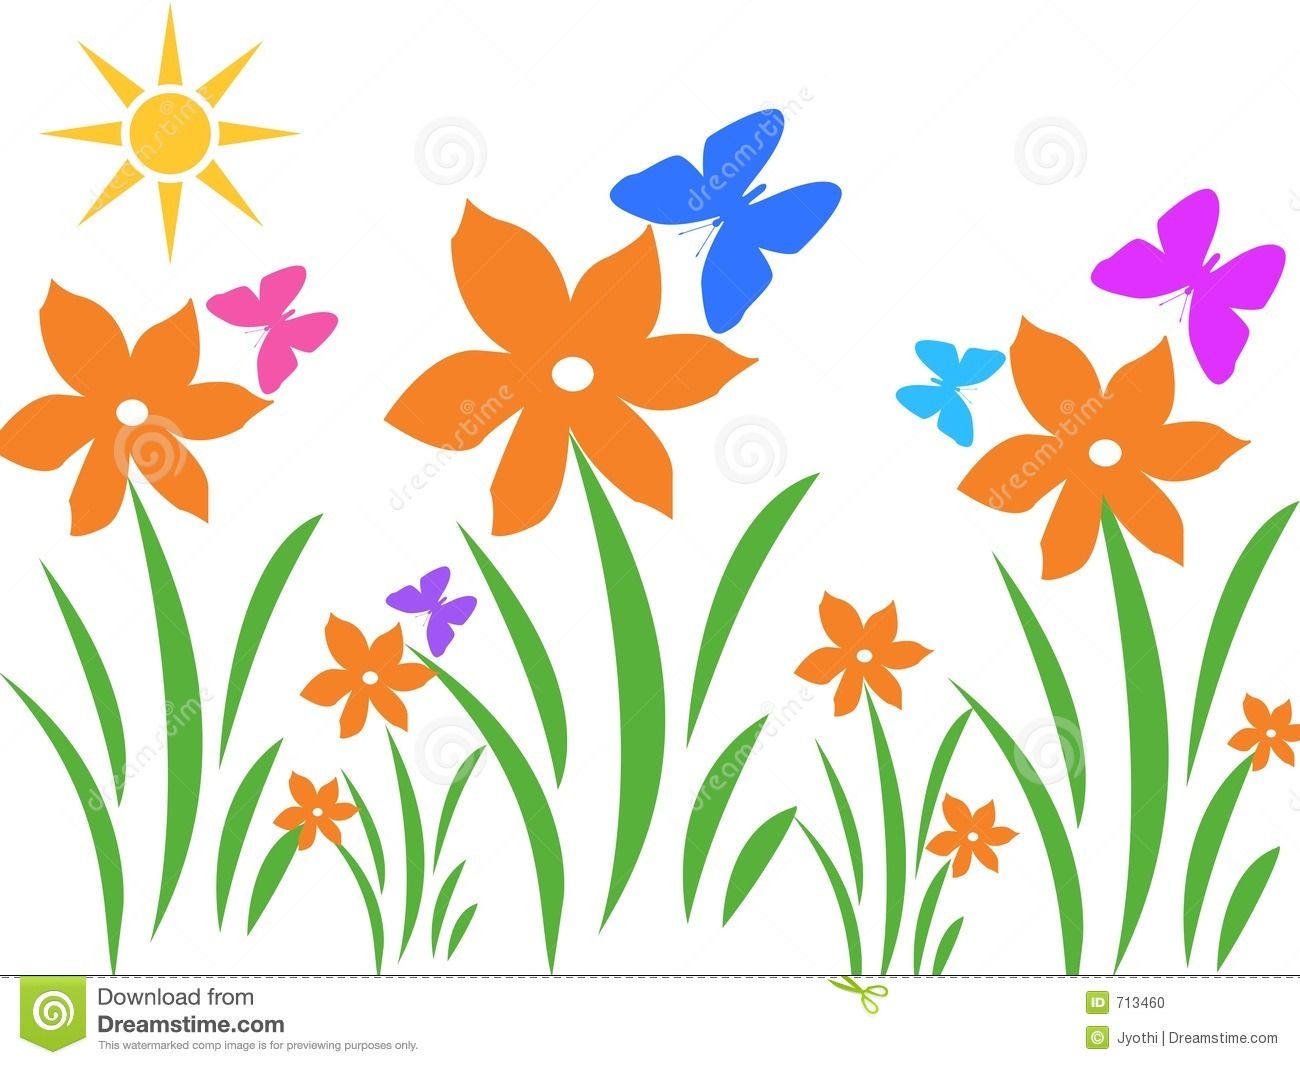 Flowers clip art free. Planting clipart summer